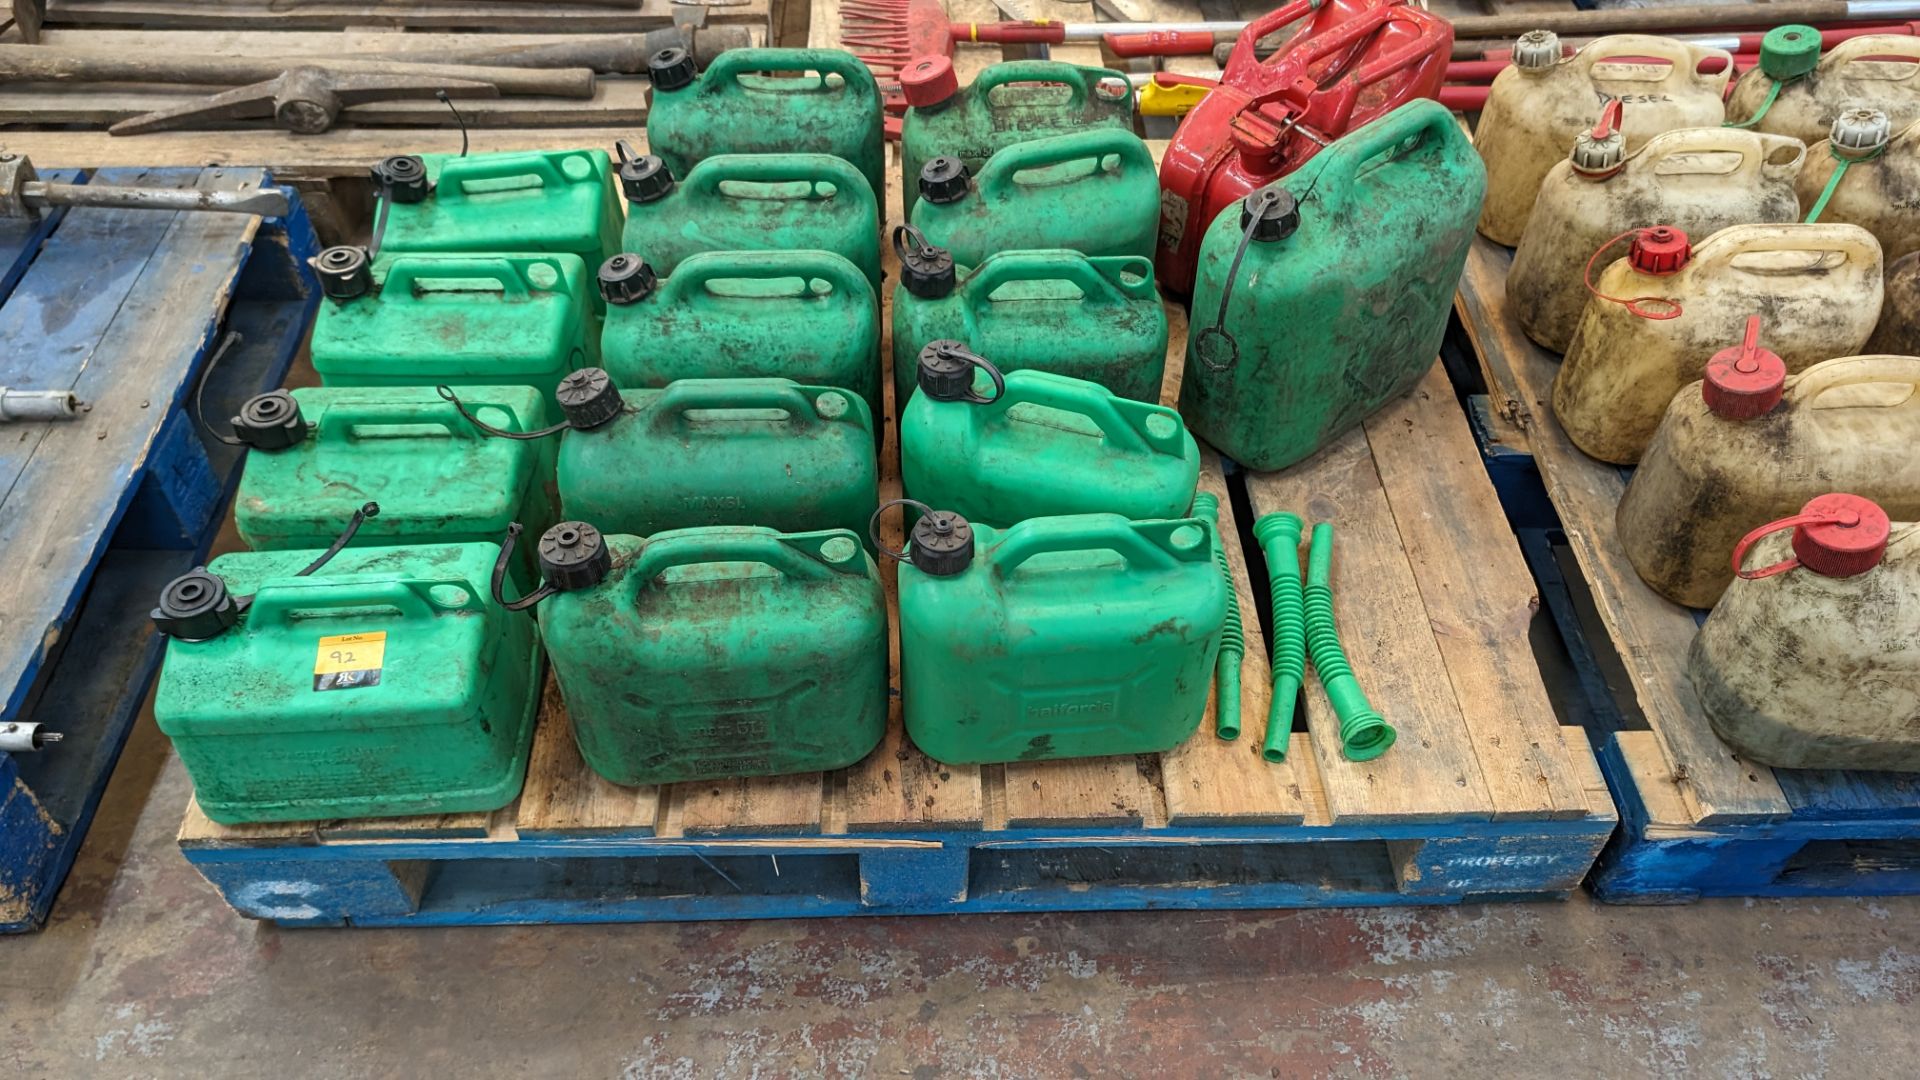 The contents of a pallet of plastic fuel cans - Image 2 of 7